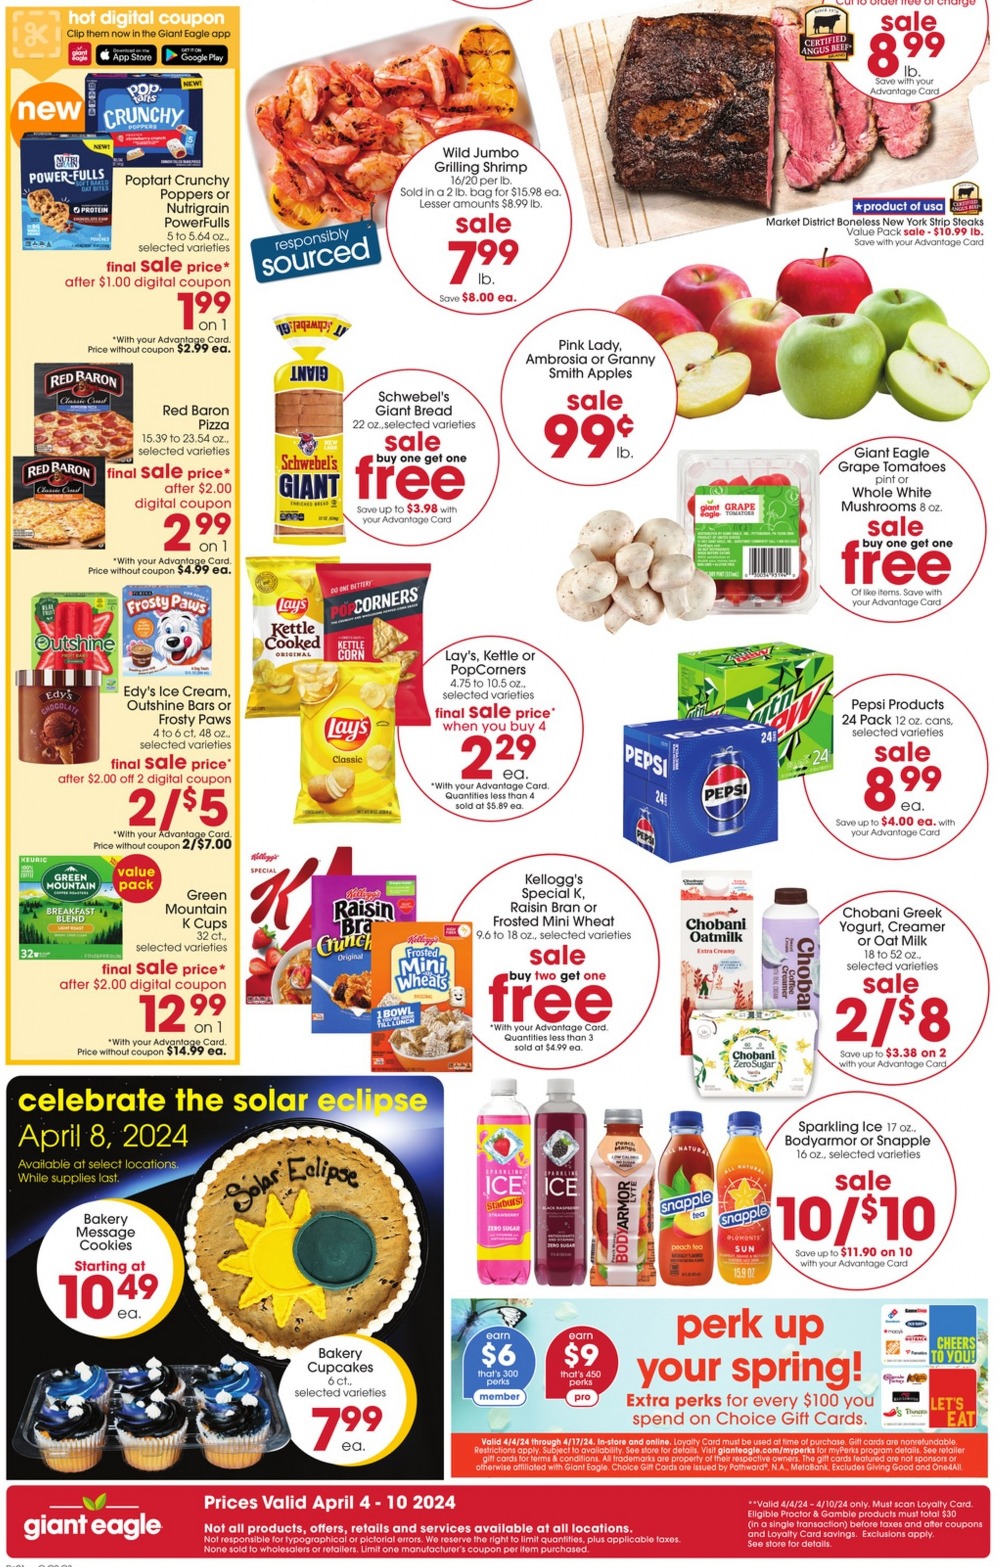 Giant Eagle Weekly Ad April 4 to April 10 2024 1 – giant eagle ad 2 3